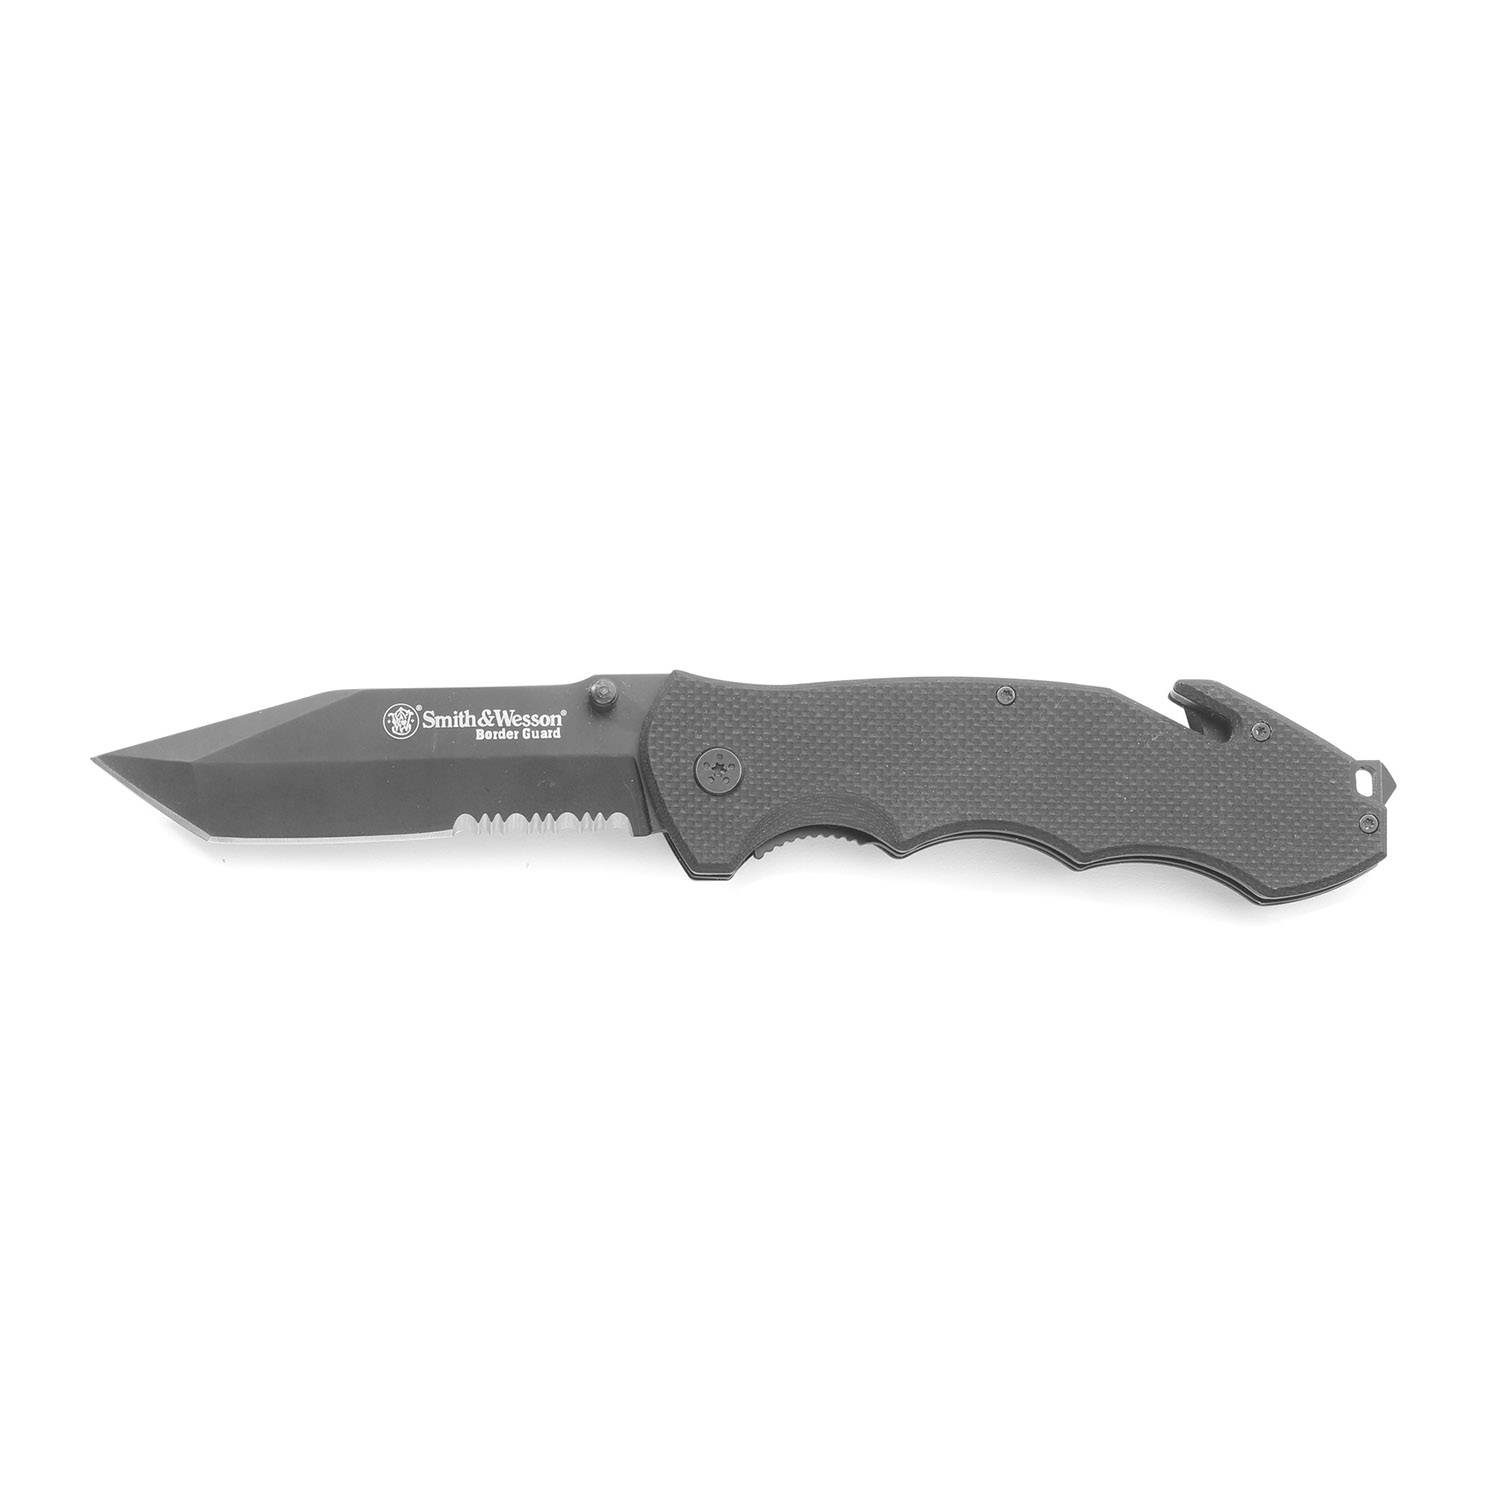 Smith & Wesson Border Guard Tanto Blade Rescue Knife and Too